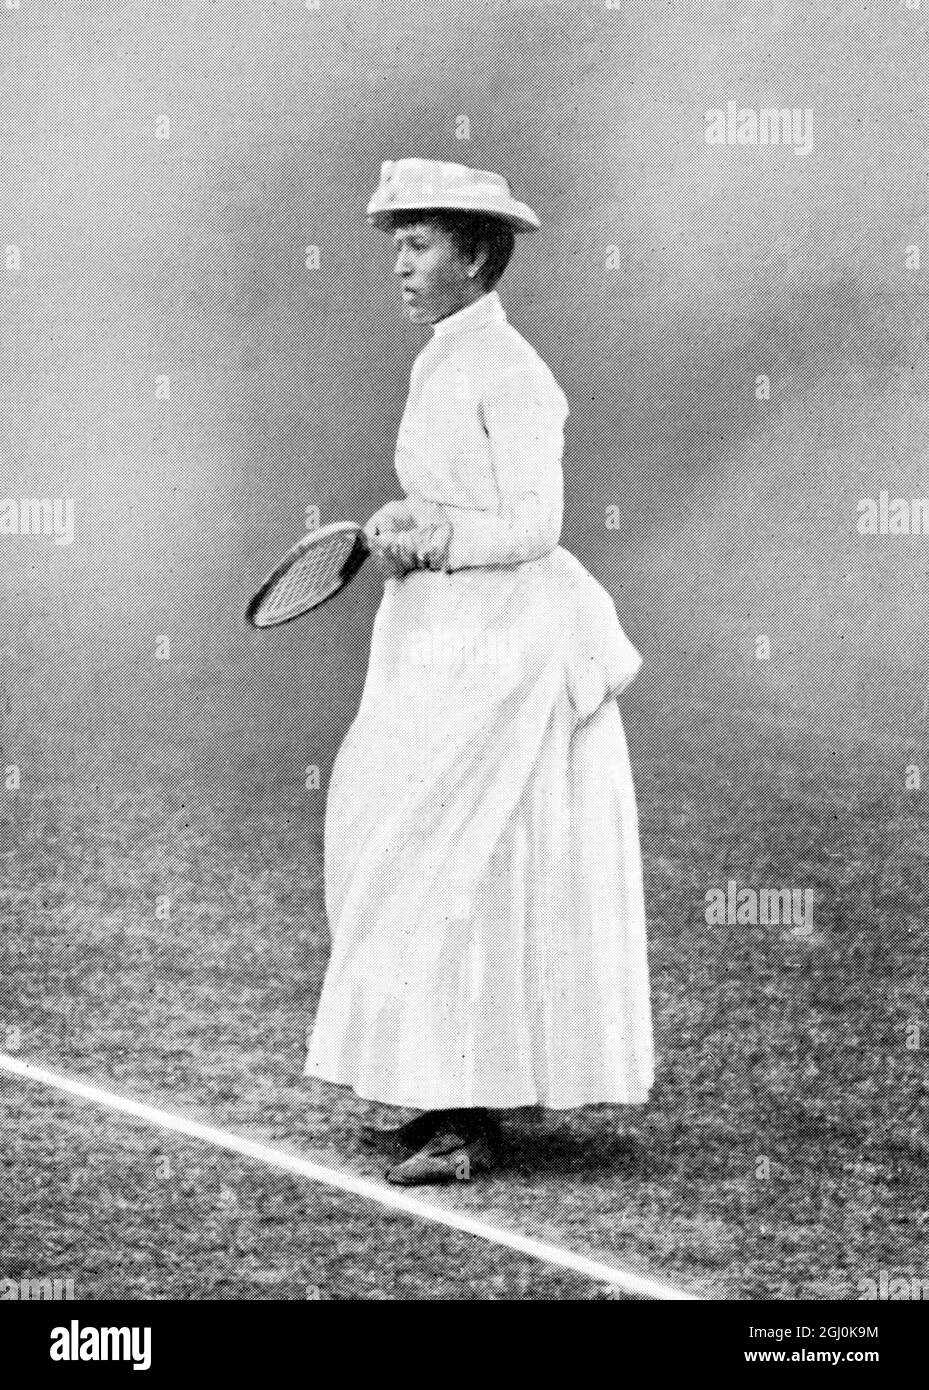 Miss Bingley 1886 - Blanche Bingley (November 3, 1863 - 6 August 1946) was an English tennis player. Born in Greenford in the London Borough of Ealing, Blanche Bingley was a member of the ''Ealing Lawn Tennis & Archery Club.'' In 1884, she competed in the first ever Wimbledon championships for women and two years later captured the first of her six singles titles. A seven time runner-up, Bingley's thirteen finals remain a Wimbledon record as is the fourteen year time span between her first and last title. ©TopFoto Stock Photo